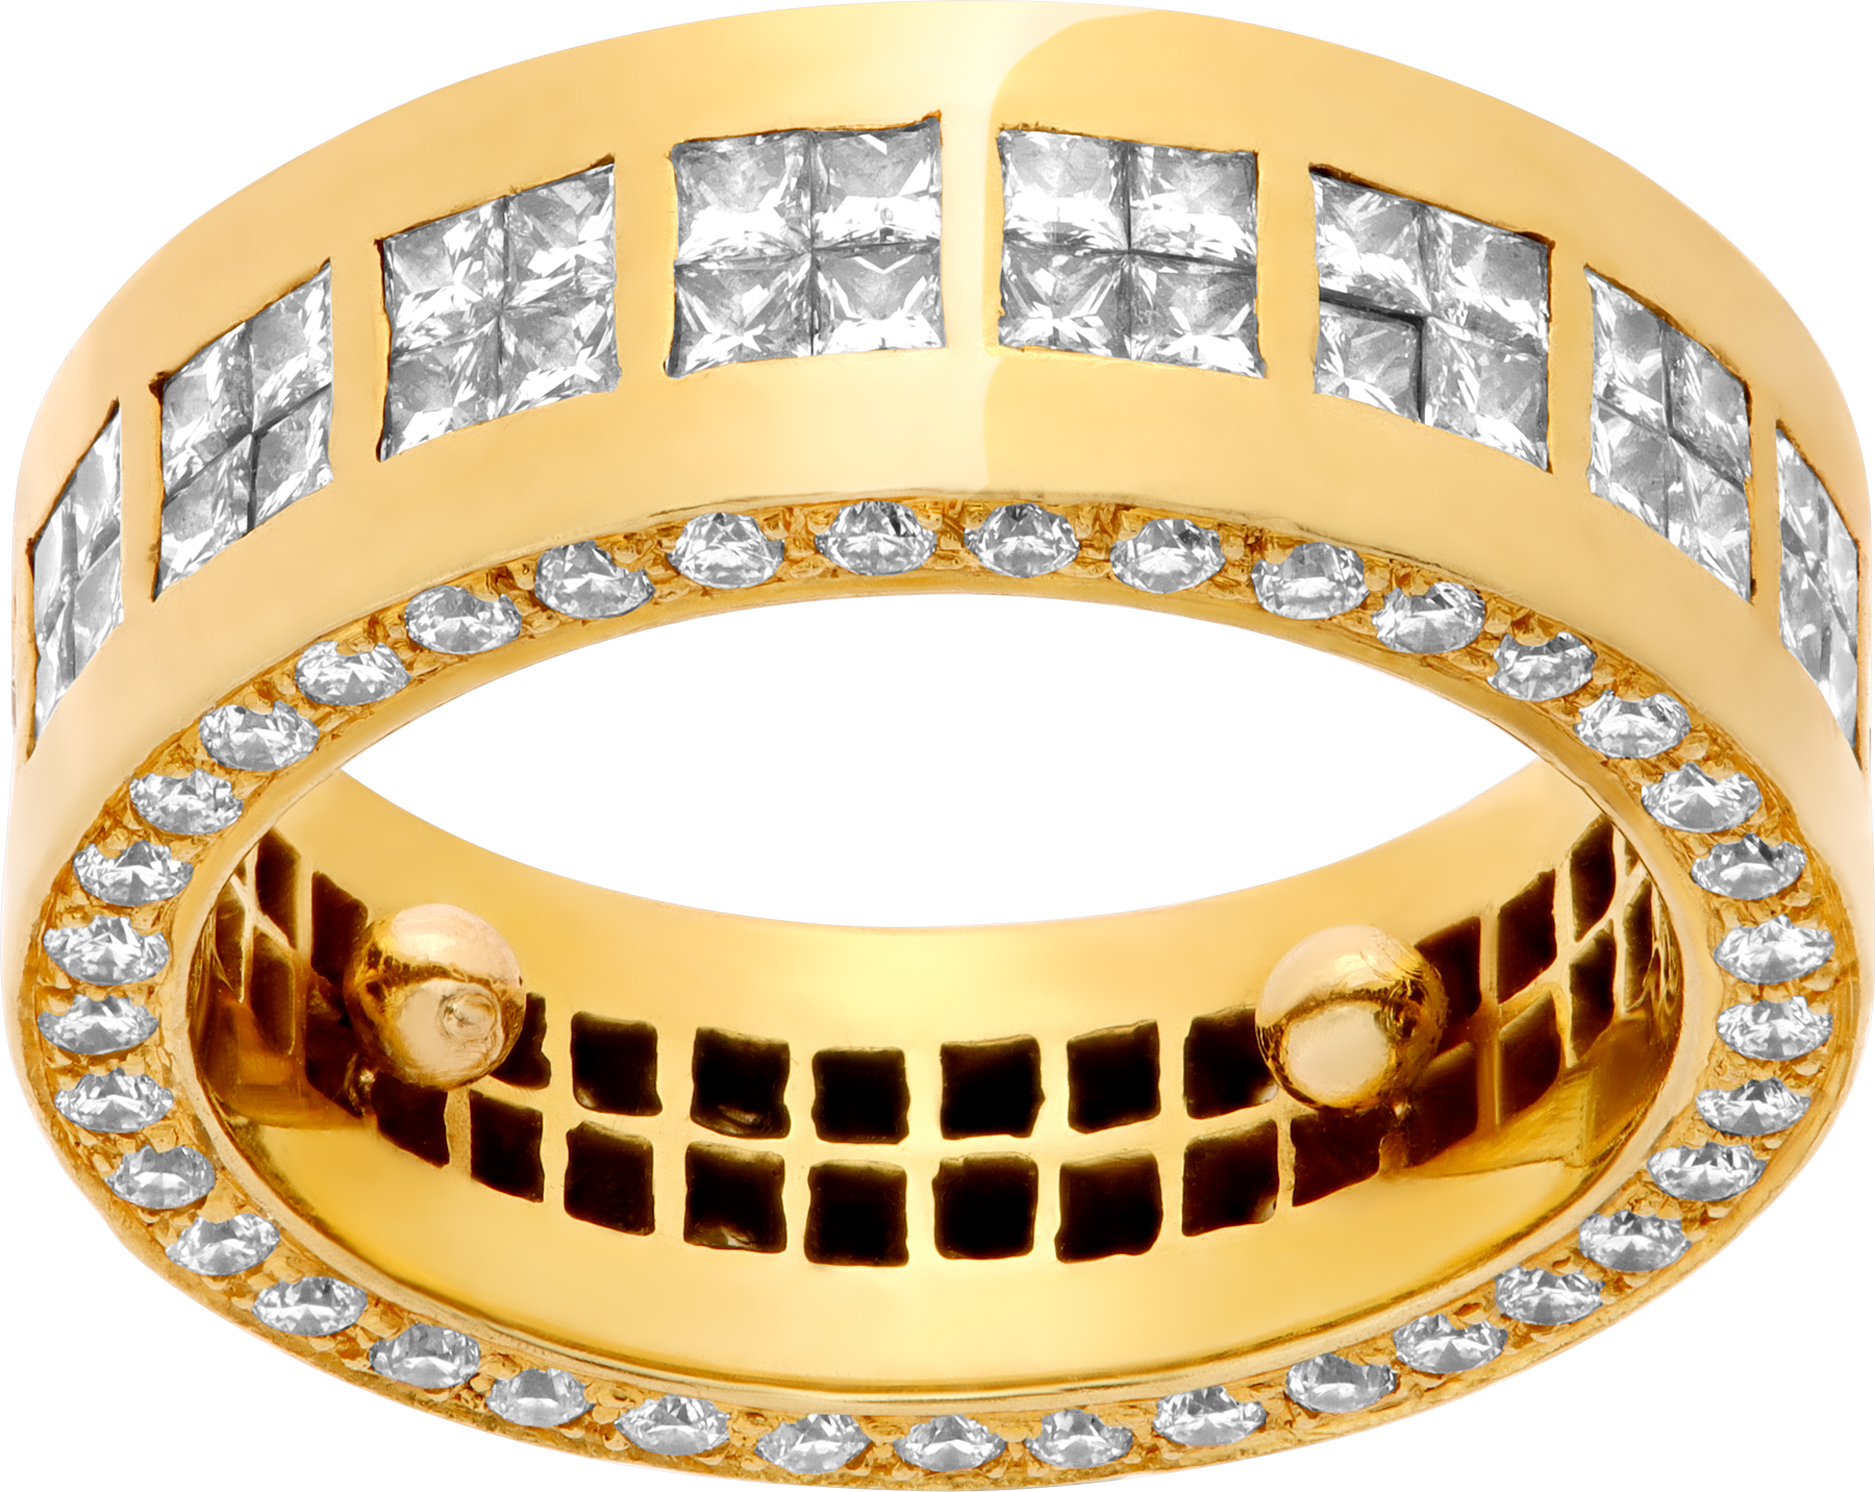 Wide band in 18k yellow gold with approximately 2.16 carats in diamonds